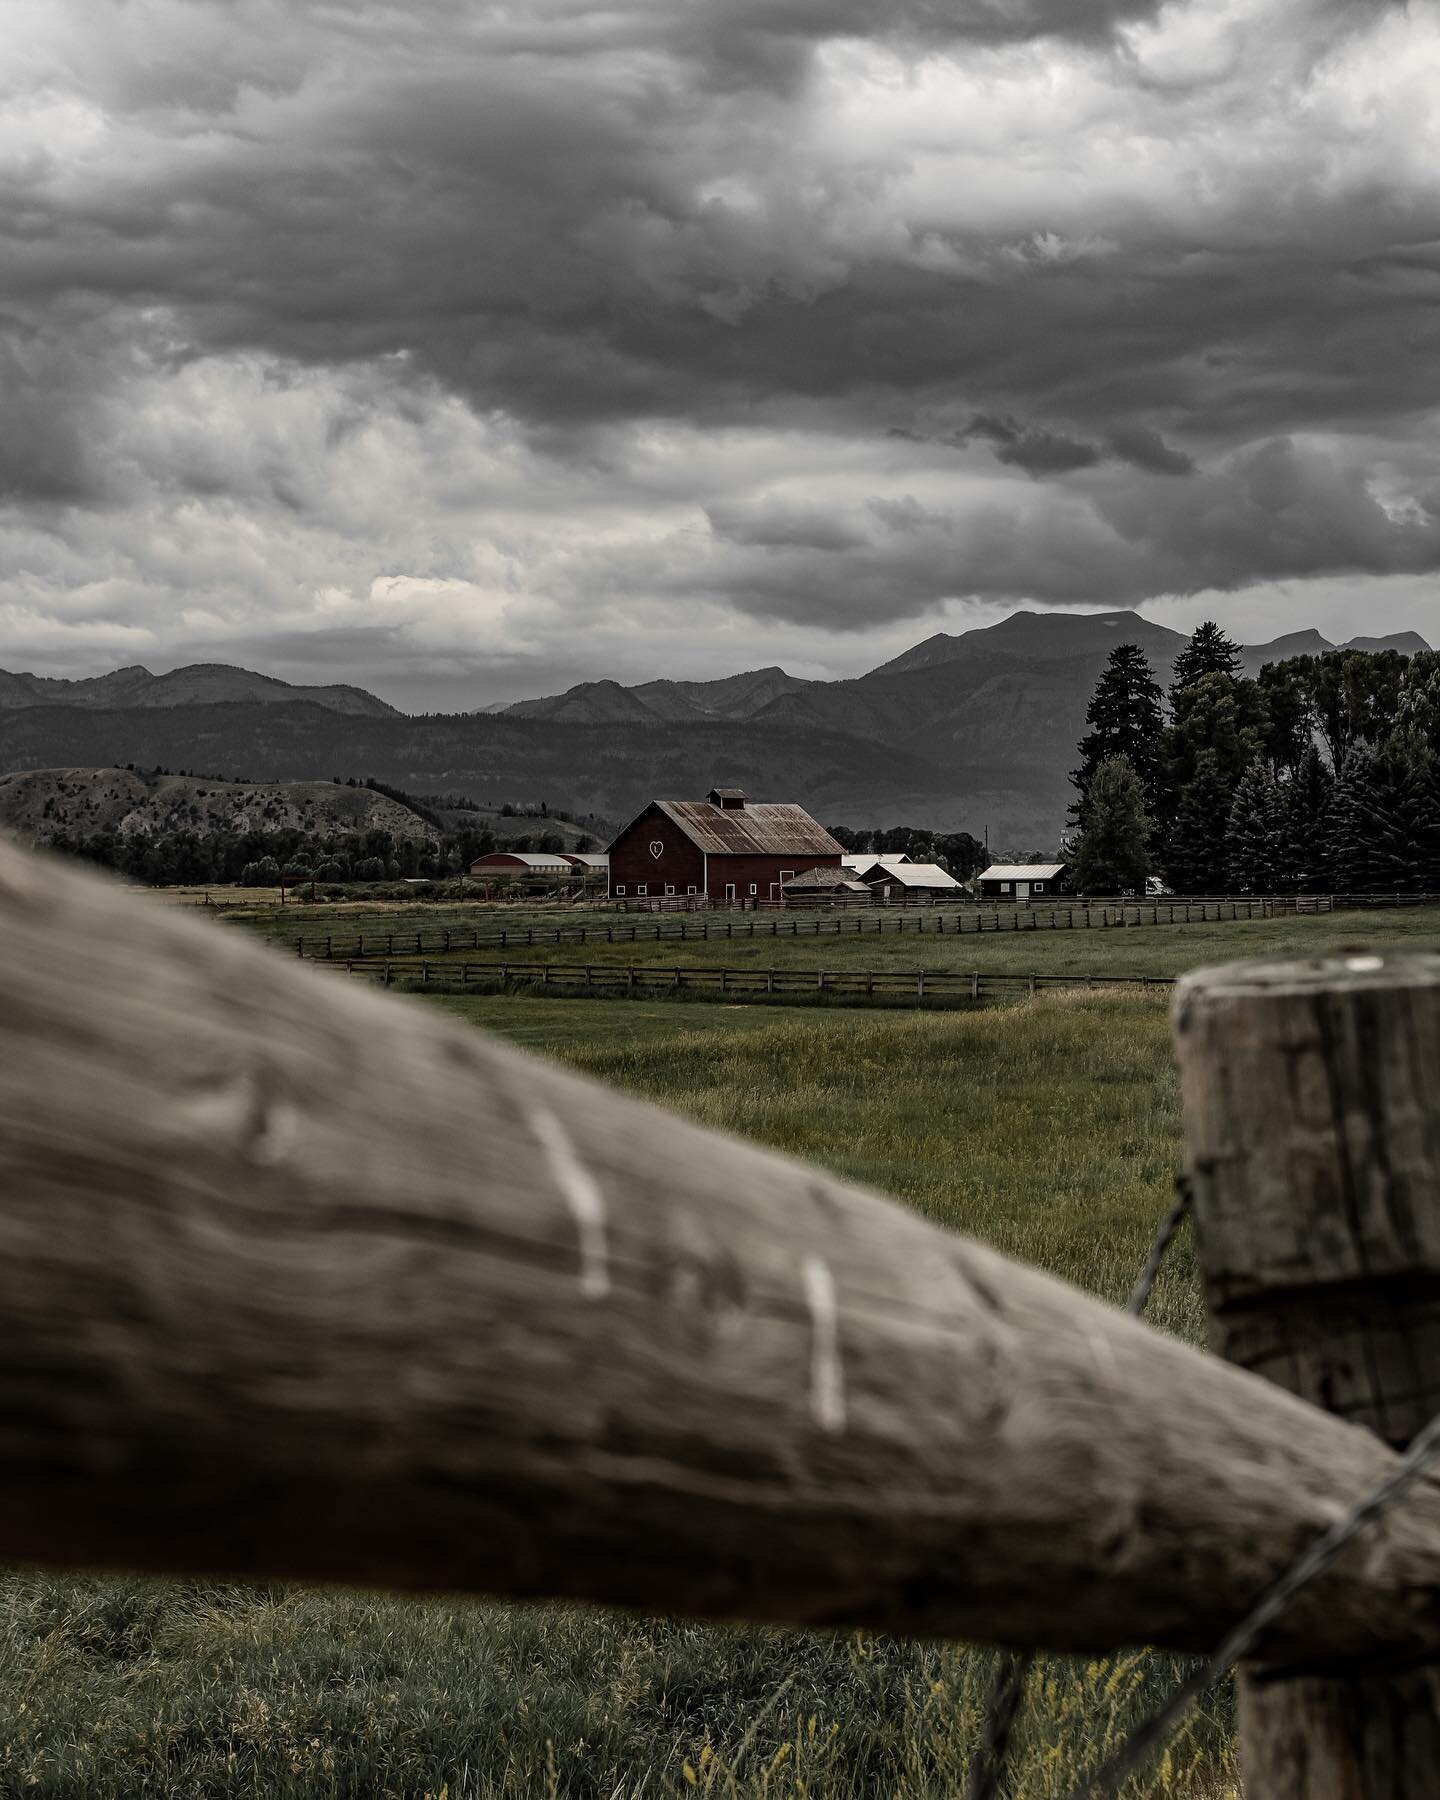 Rain was coming in making the sky very ominous and adding my preset D&eacute;color&eacute; really adds to the feel. #d&eacute;color&eacute;preset #jackson #landscapephotography #barn #farmlife